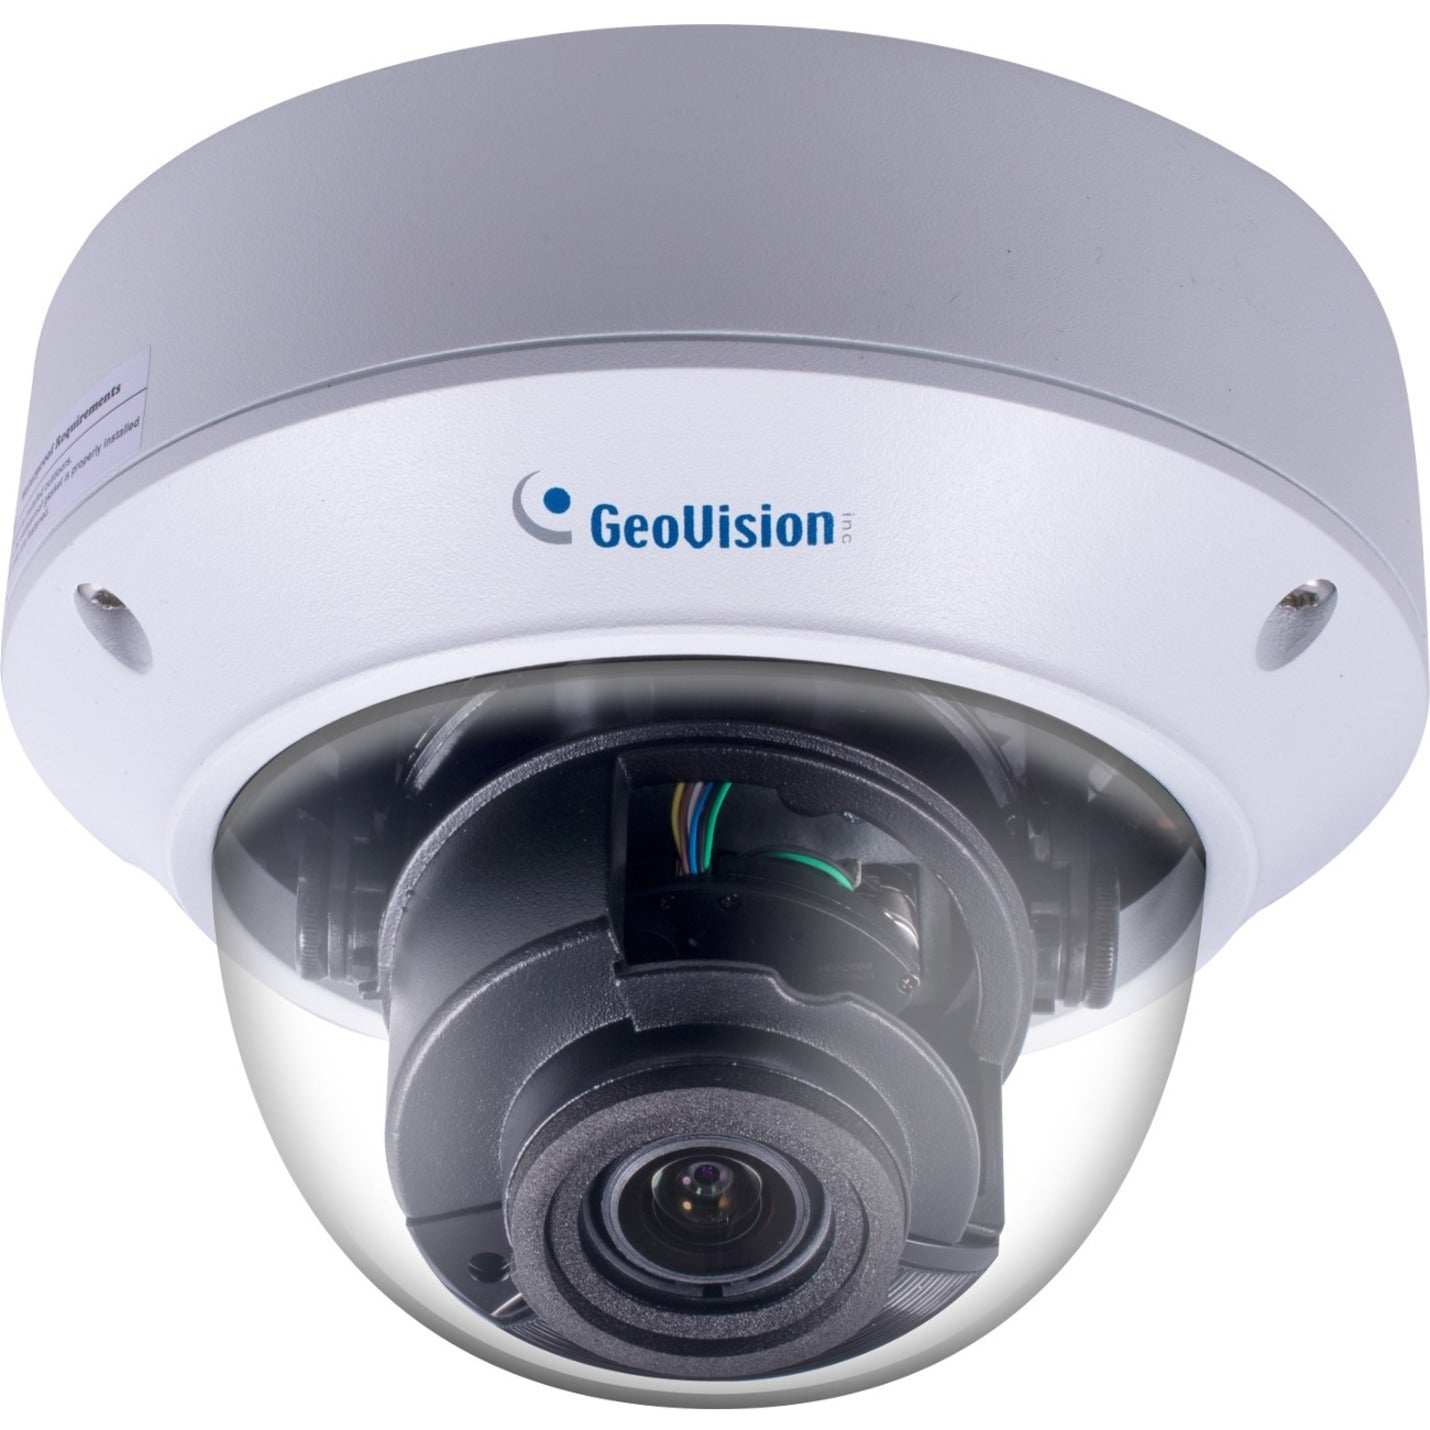 GeoVision GV-TVD4810 AI 4MP H.265 5x Zoom Super Low Lux WDR Pro IR Vandal Proof IP Dome, Outdoor Network Camera